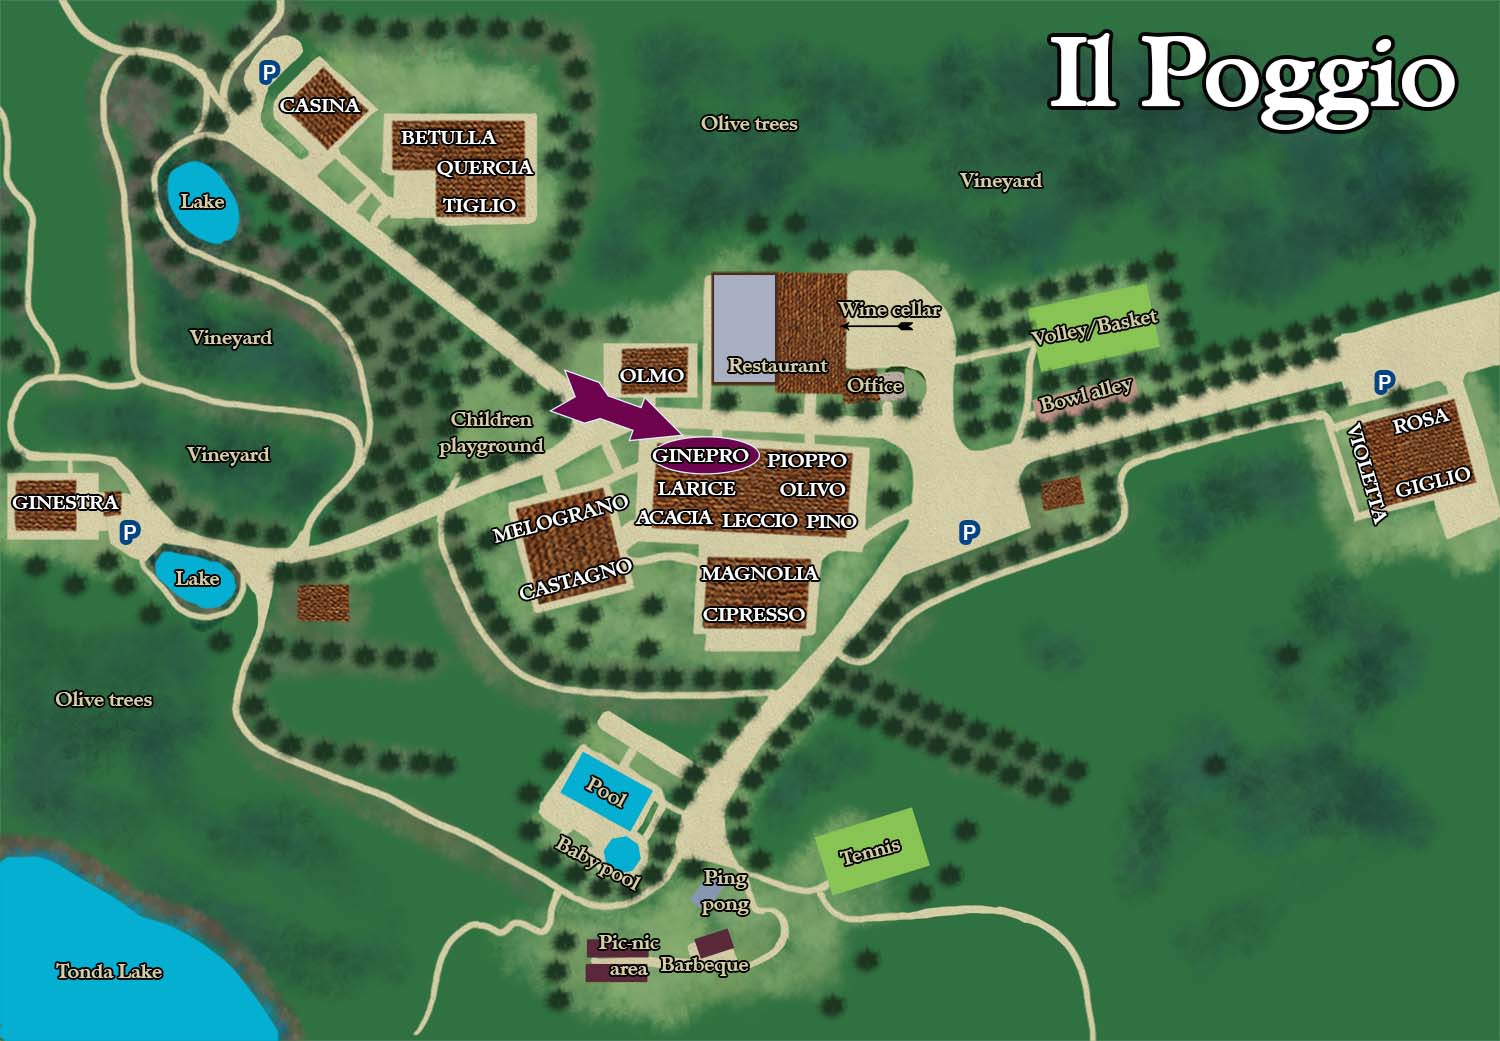 A map of the grounds of il poggibonsi